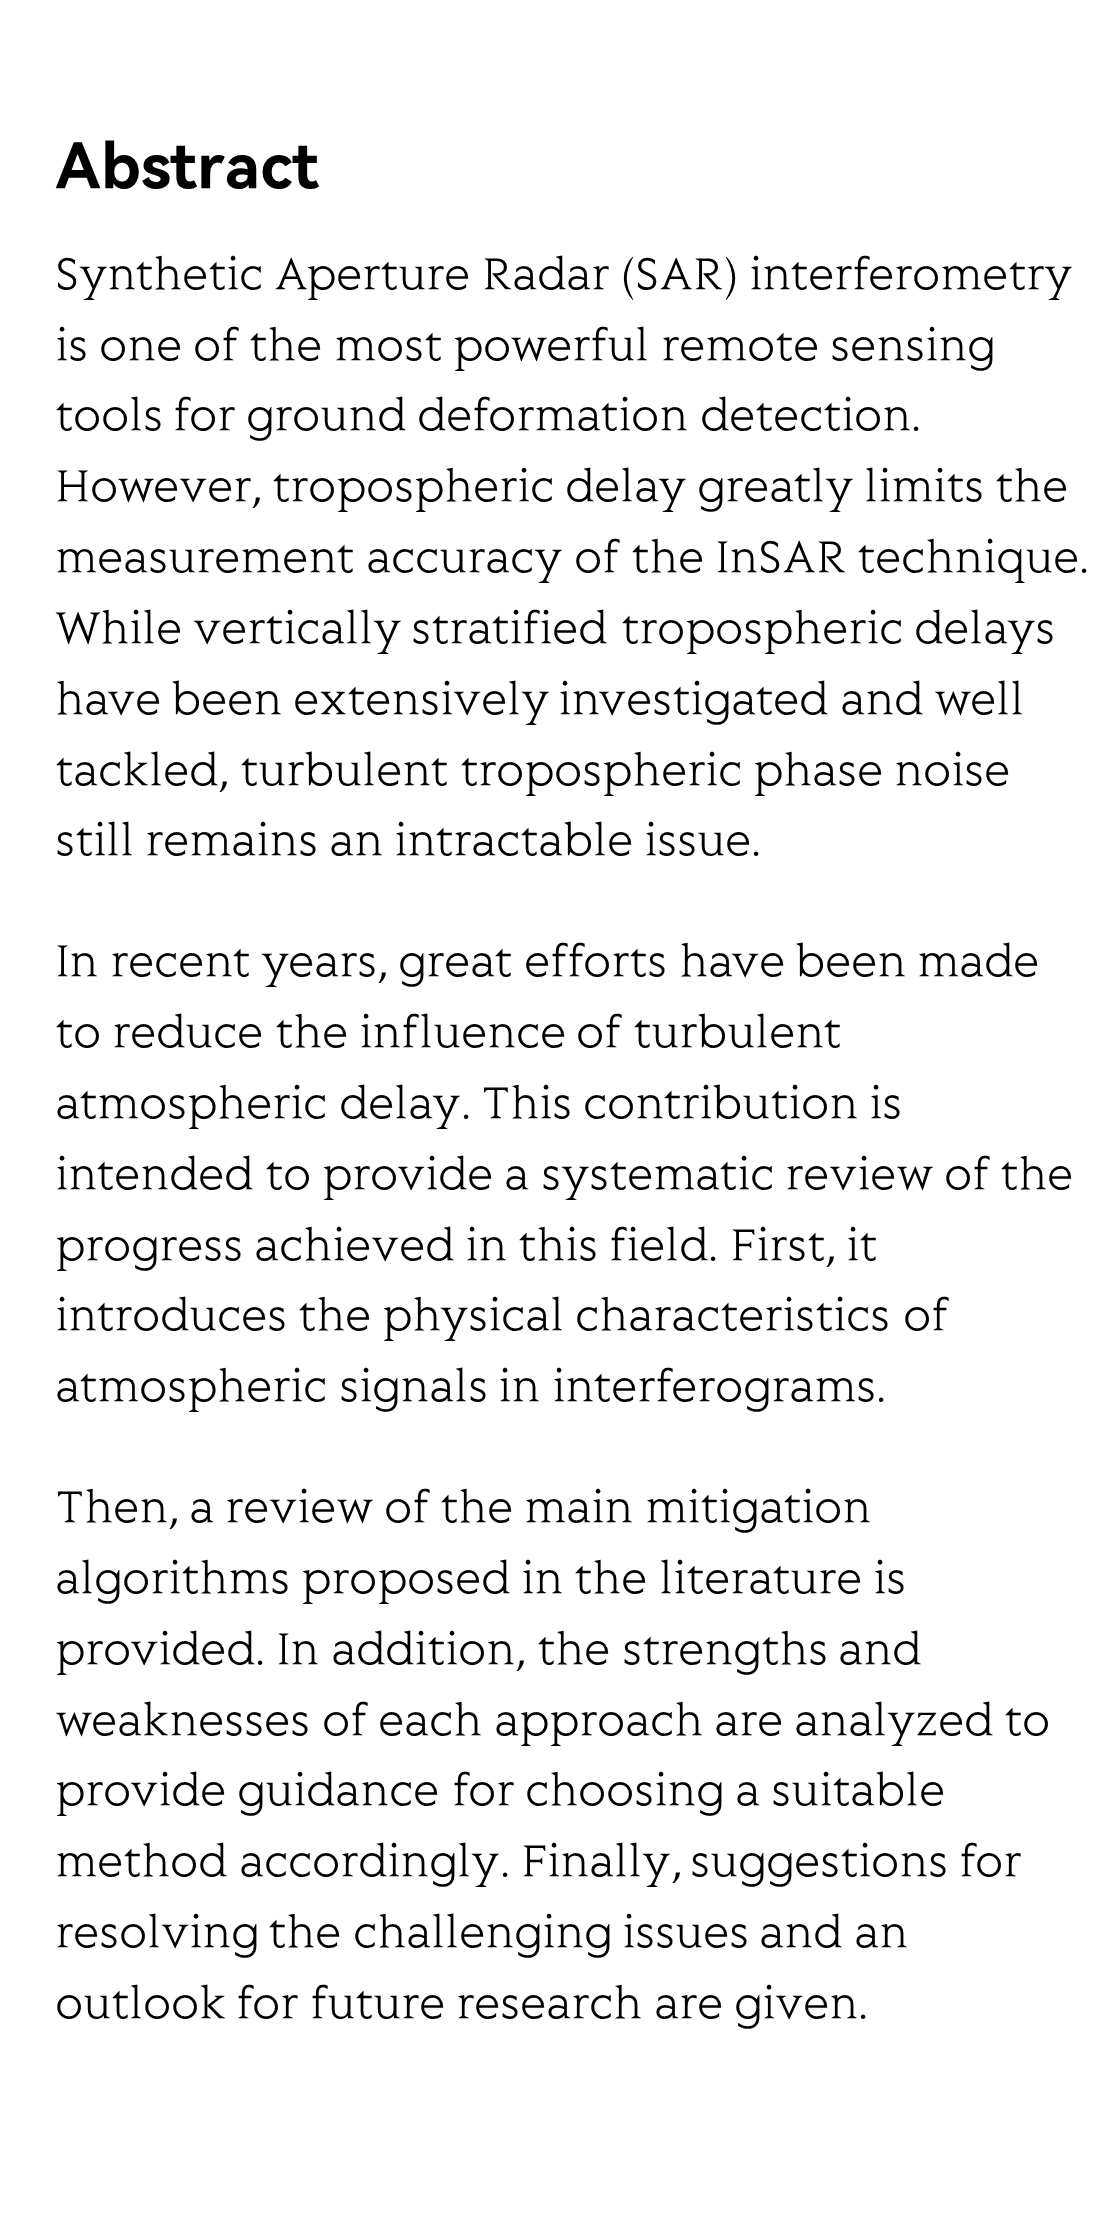 Mitigation of time-series InSAR turbulent atmospheric phase noise: A review_2